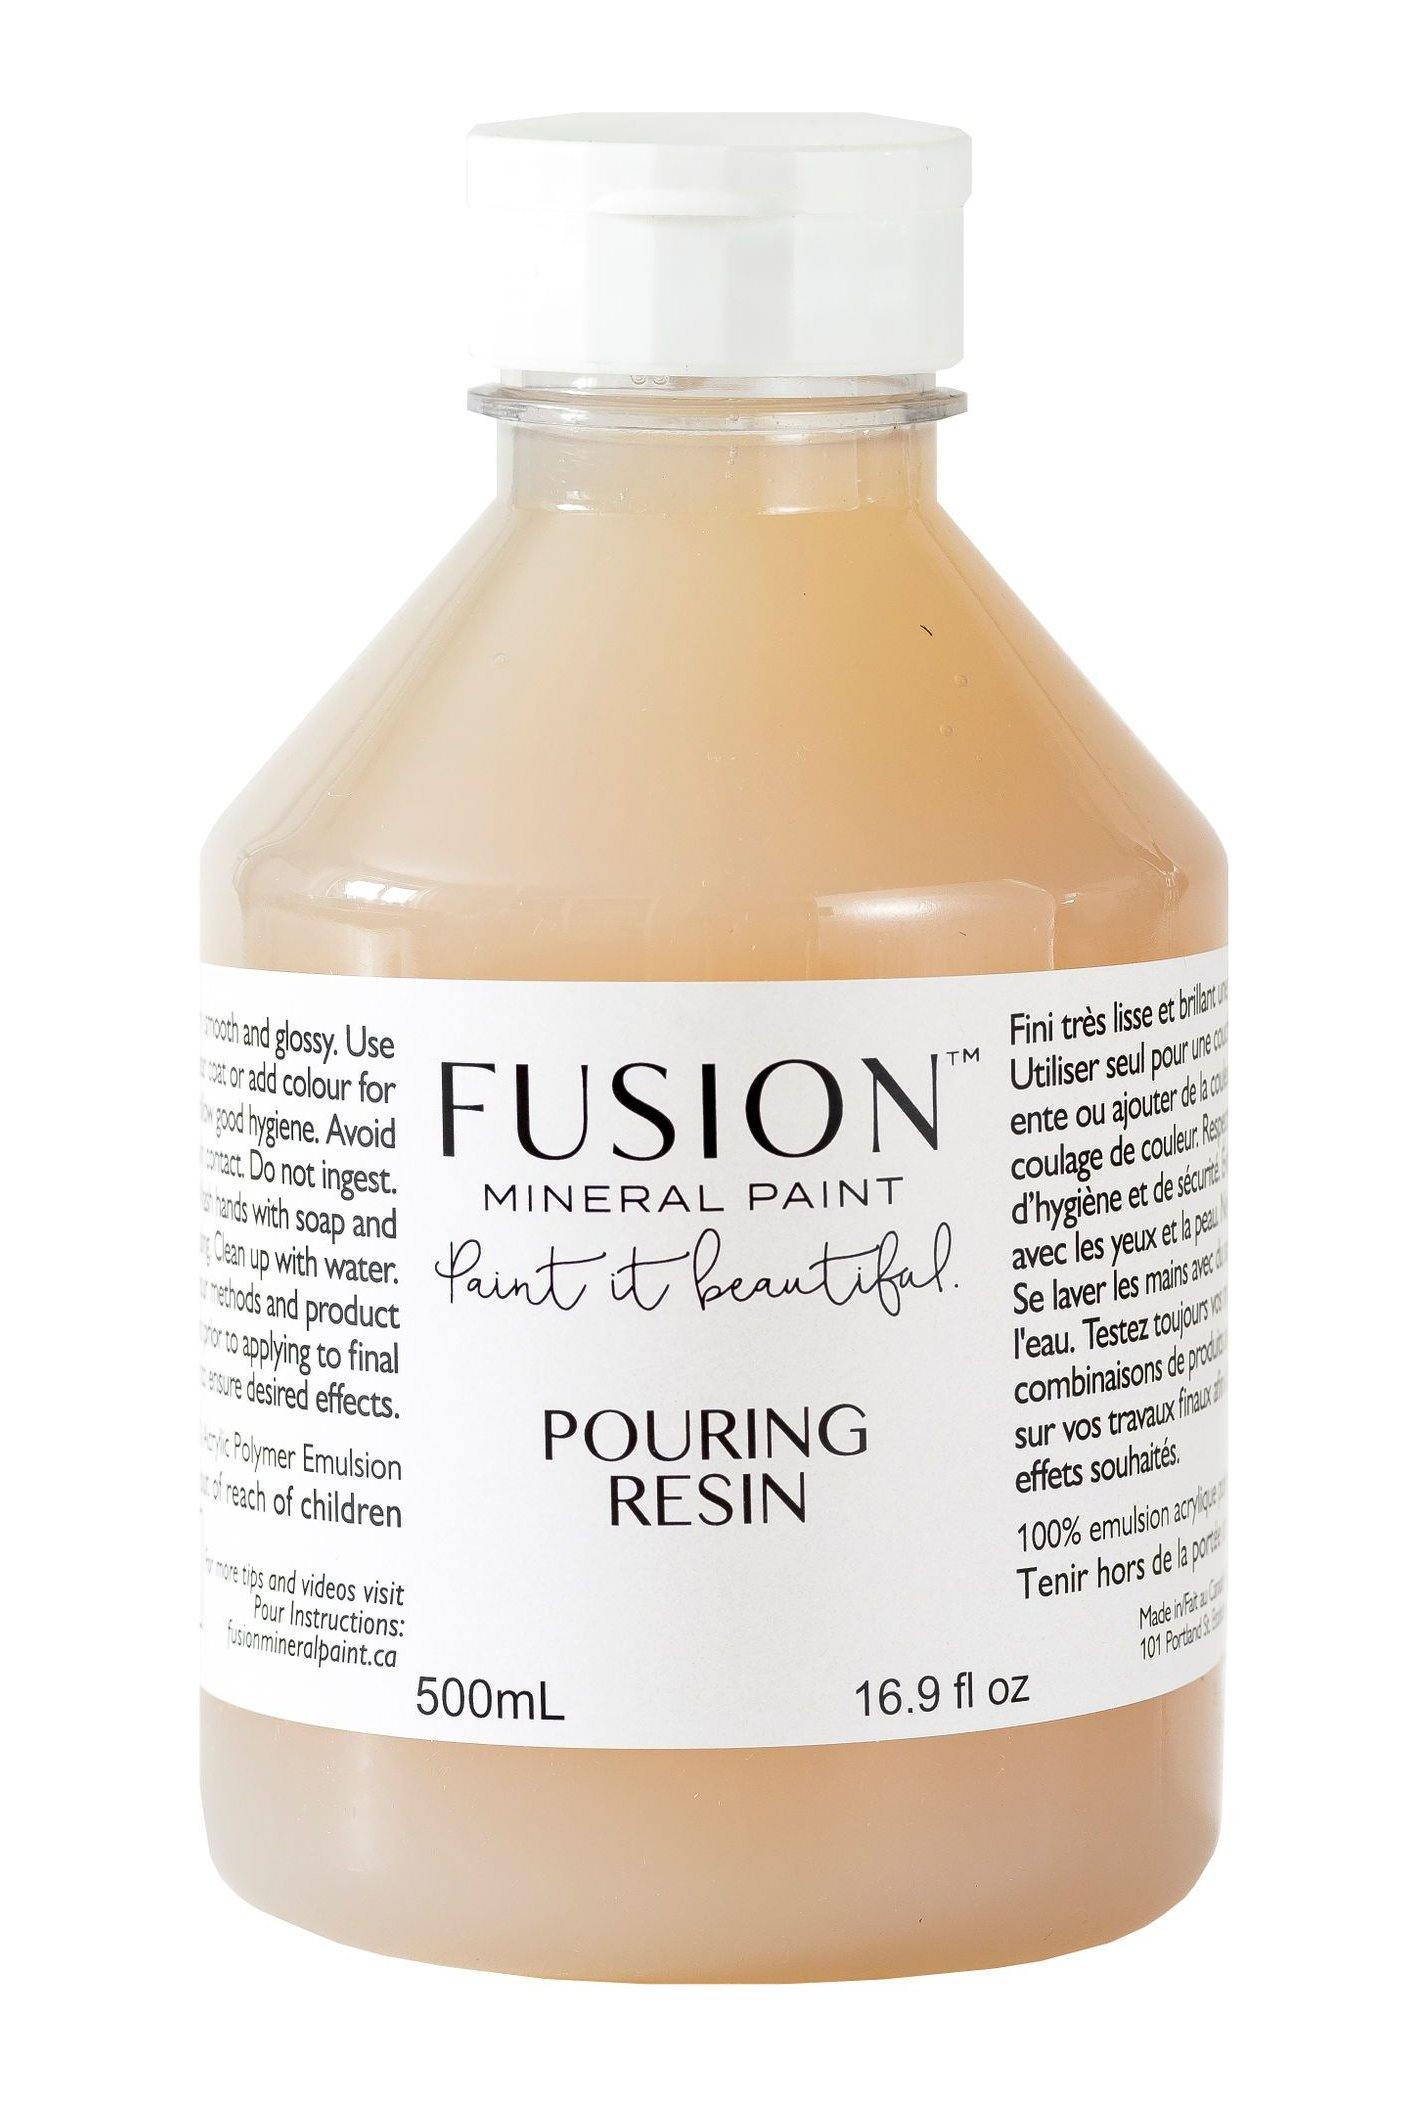 Fusion Mineral Paint Pouring Resin